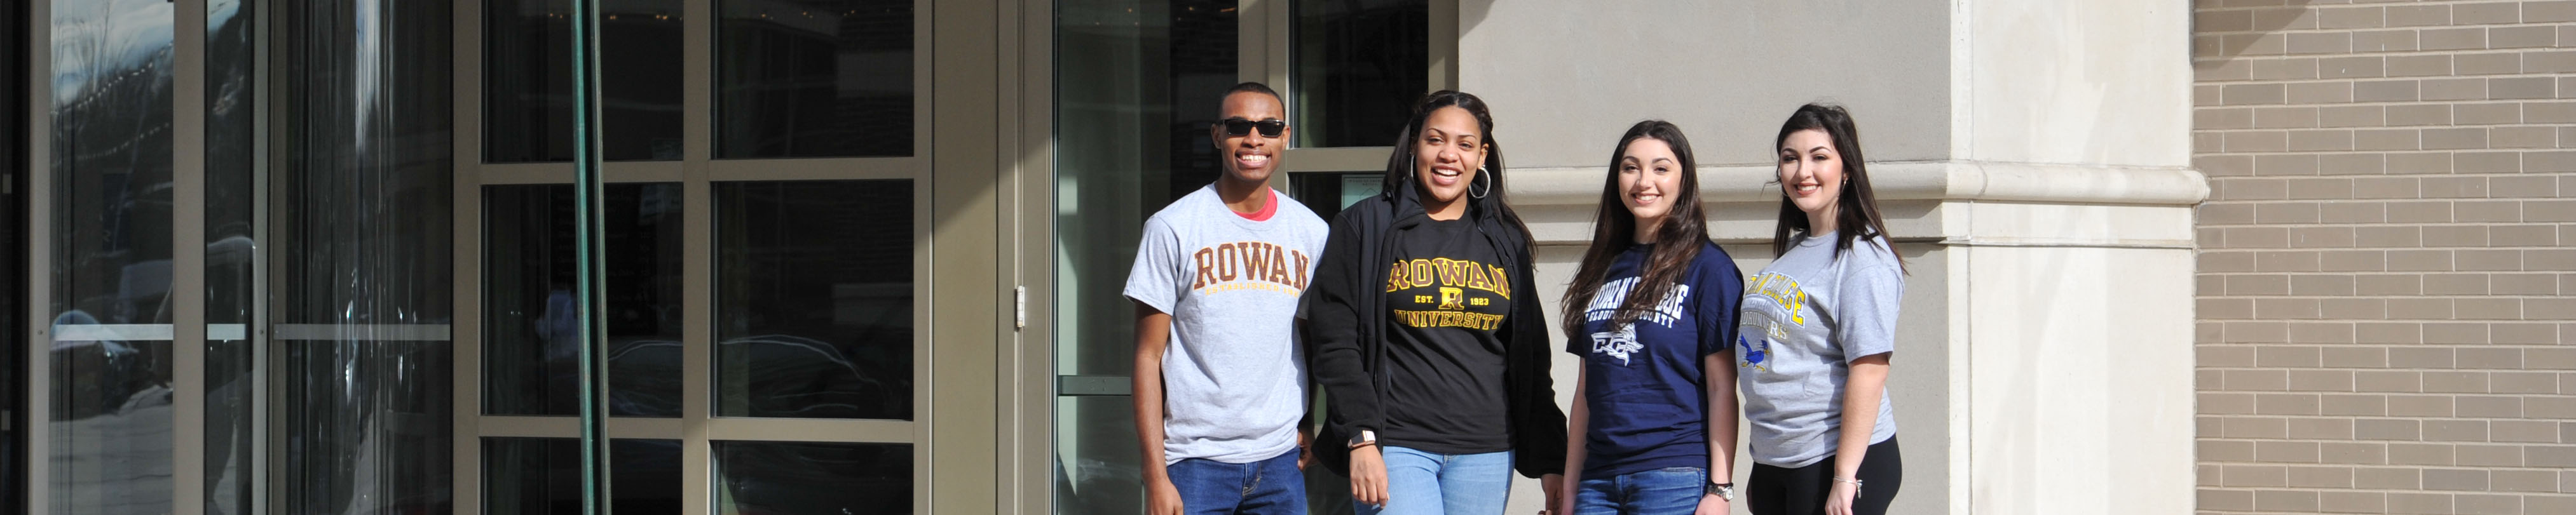 Students with RCSJ t-shirts along with Students with Rowan University standing outside